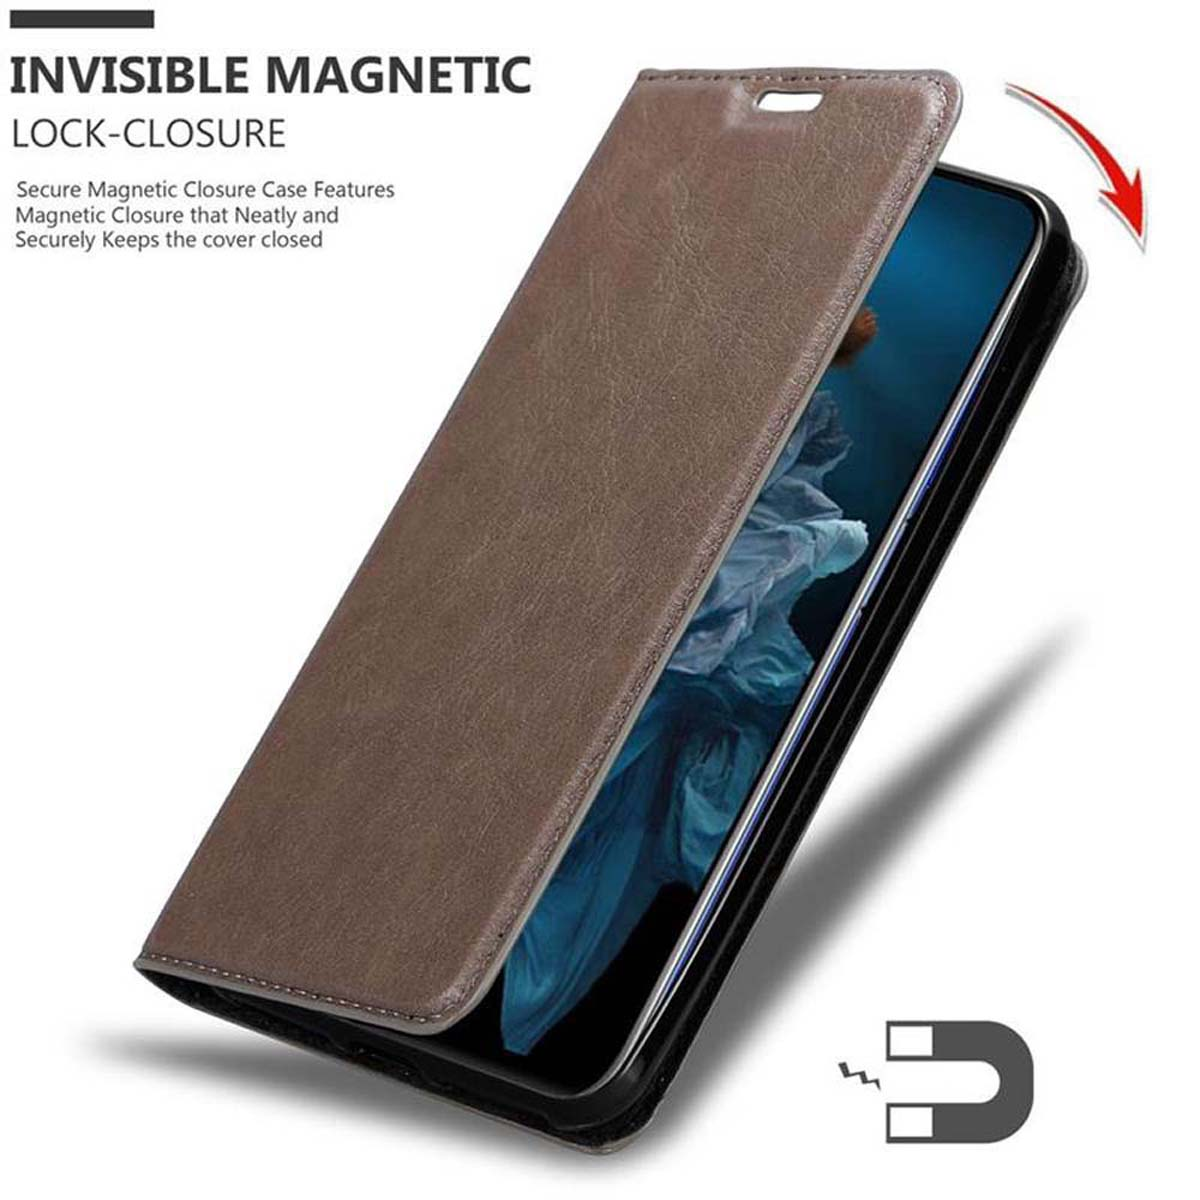 Huawei KAFFEE / BRAUN / CADORABO NOVA Invisible Bookcover, Hülle 20 20S 5T, Honor, Magnet, Book